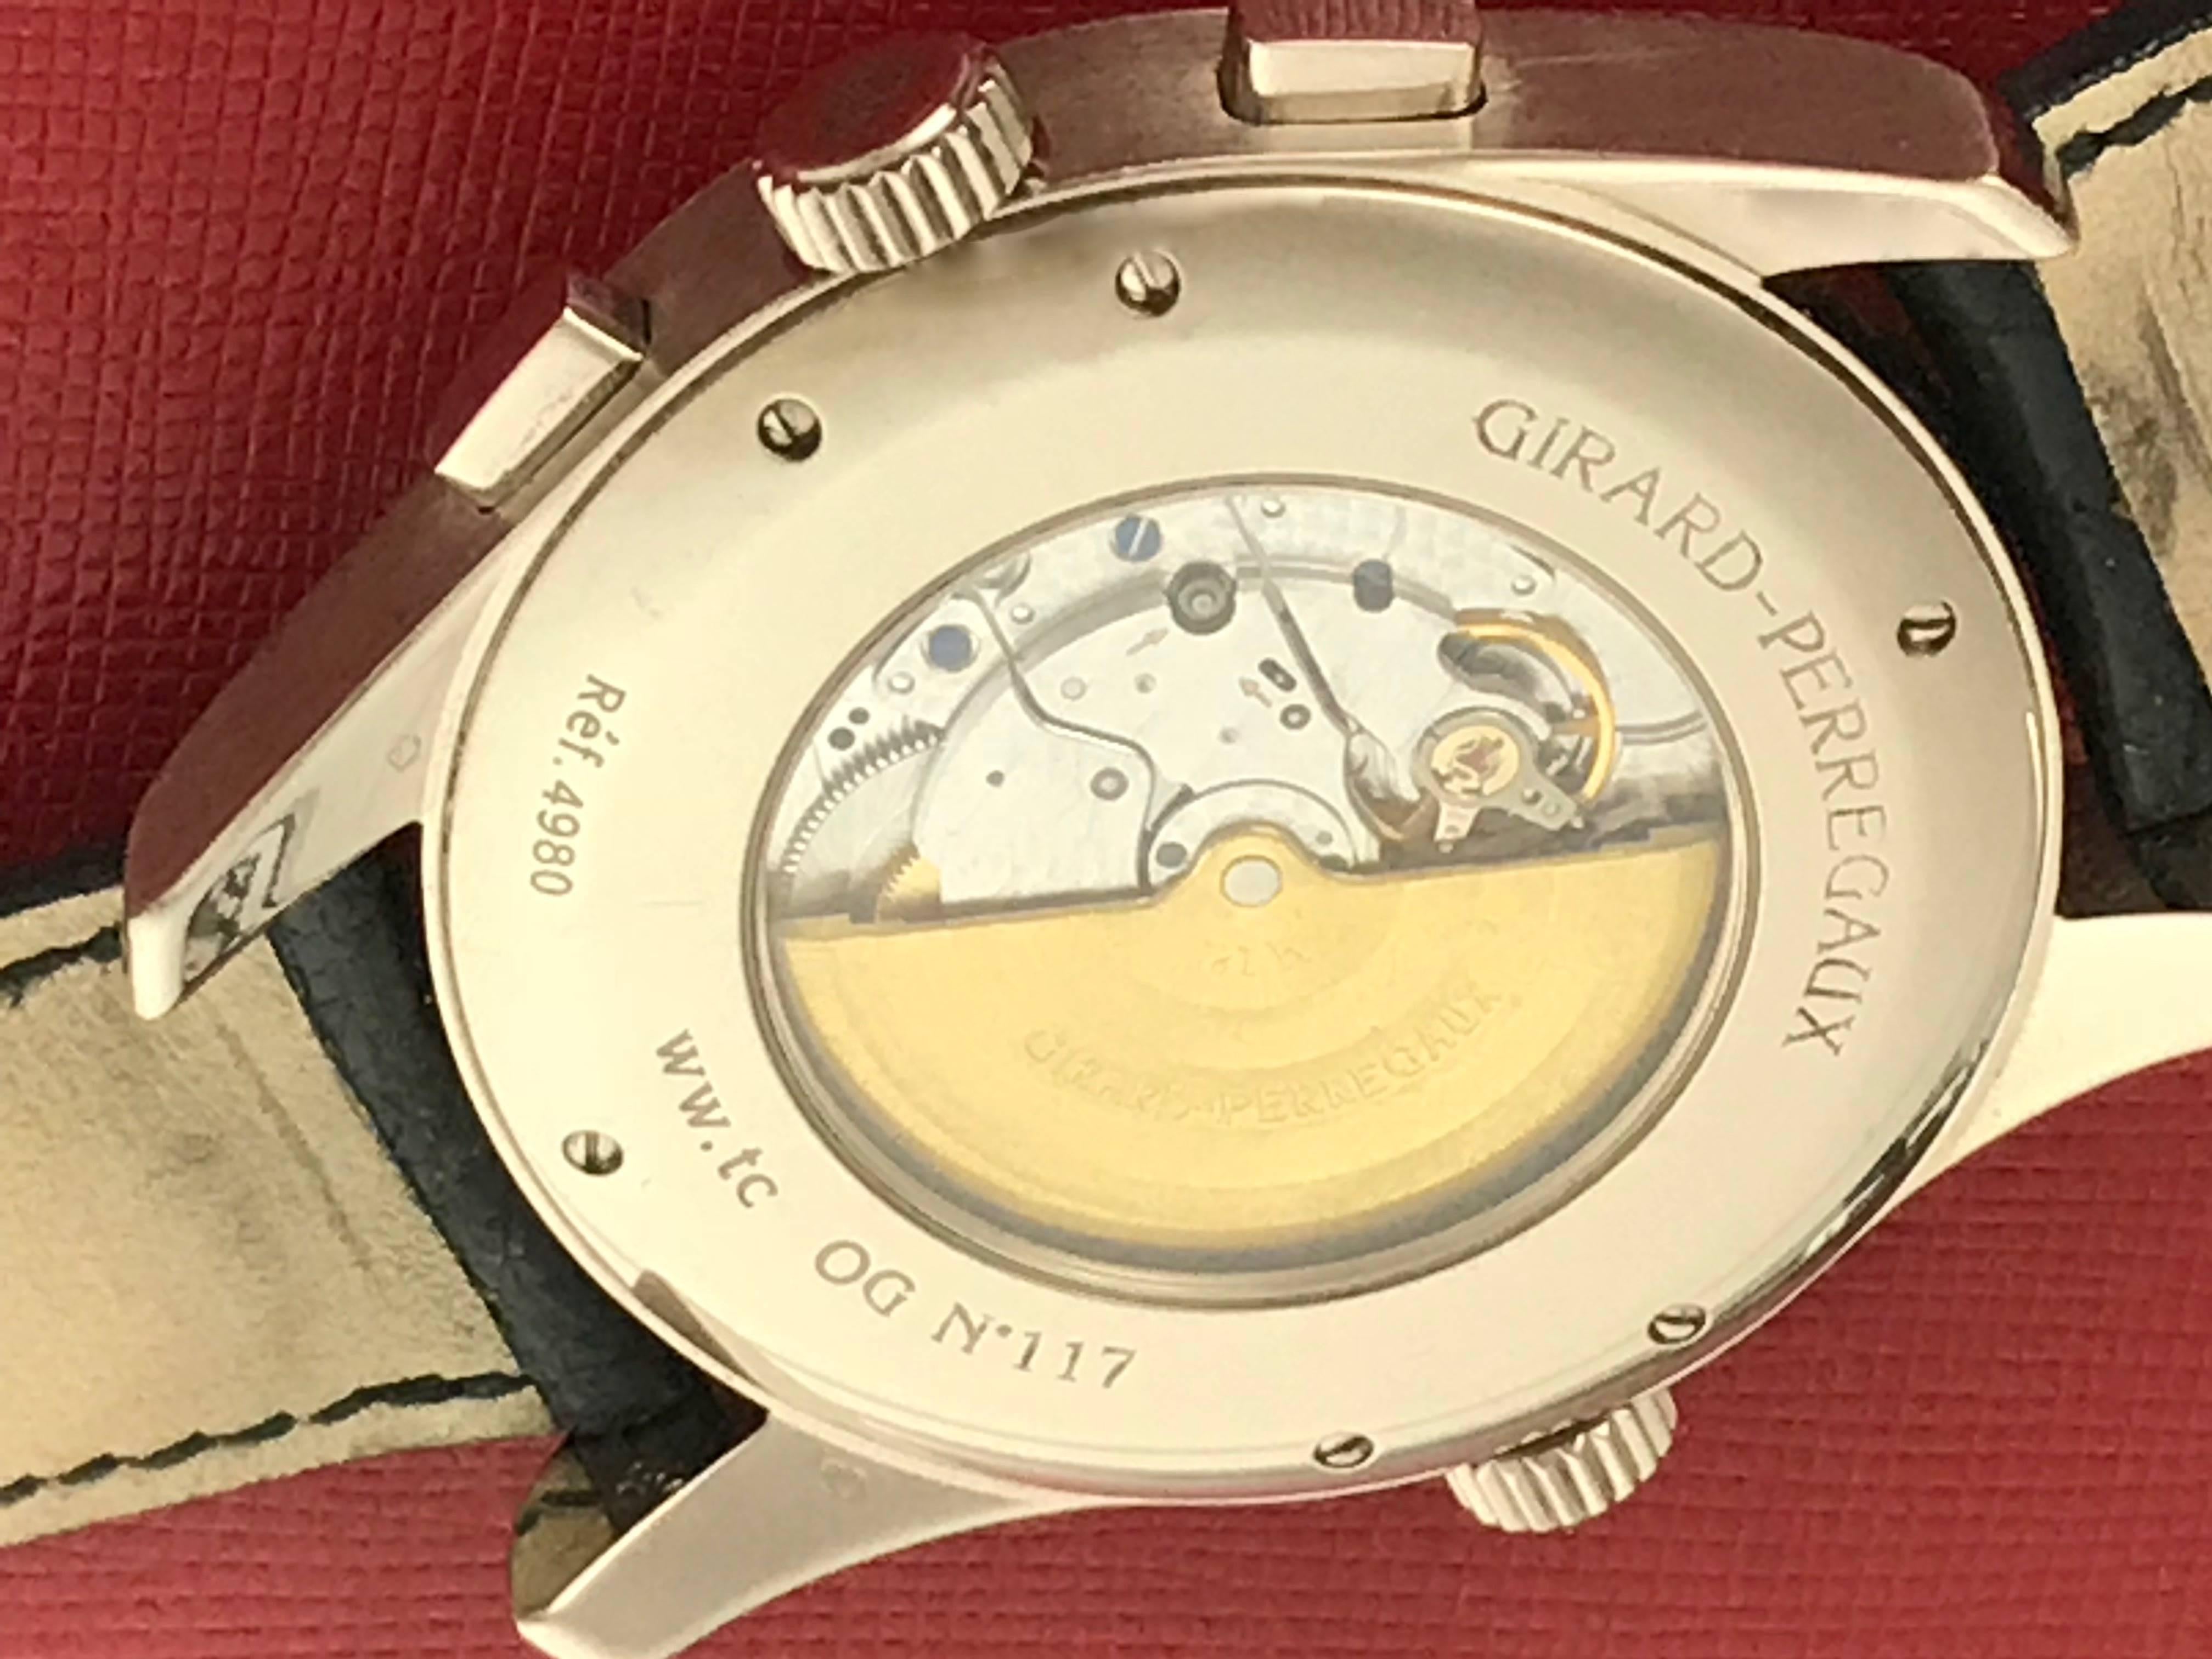 Girard Perregaux White Gold World Time Chronograph GMT Automatic Wristwatch For Sale 1